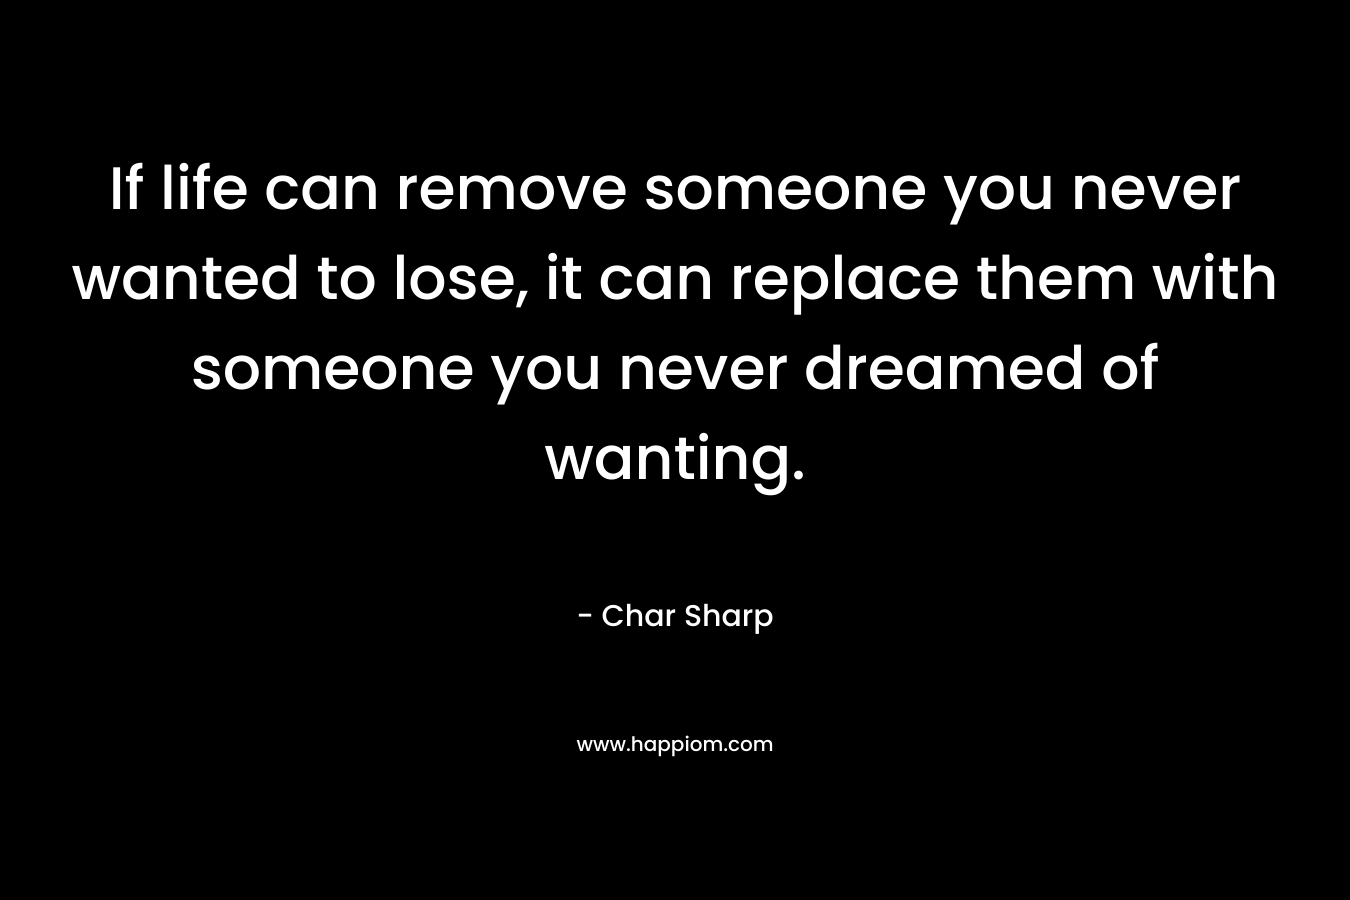 If life can remove someone you never wanted to lose, it can replace them with someone you never dreamed of wanting. – Char Sharp